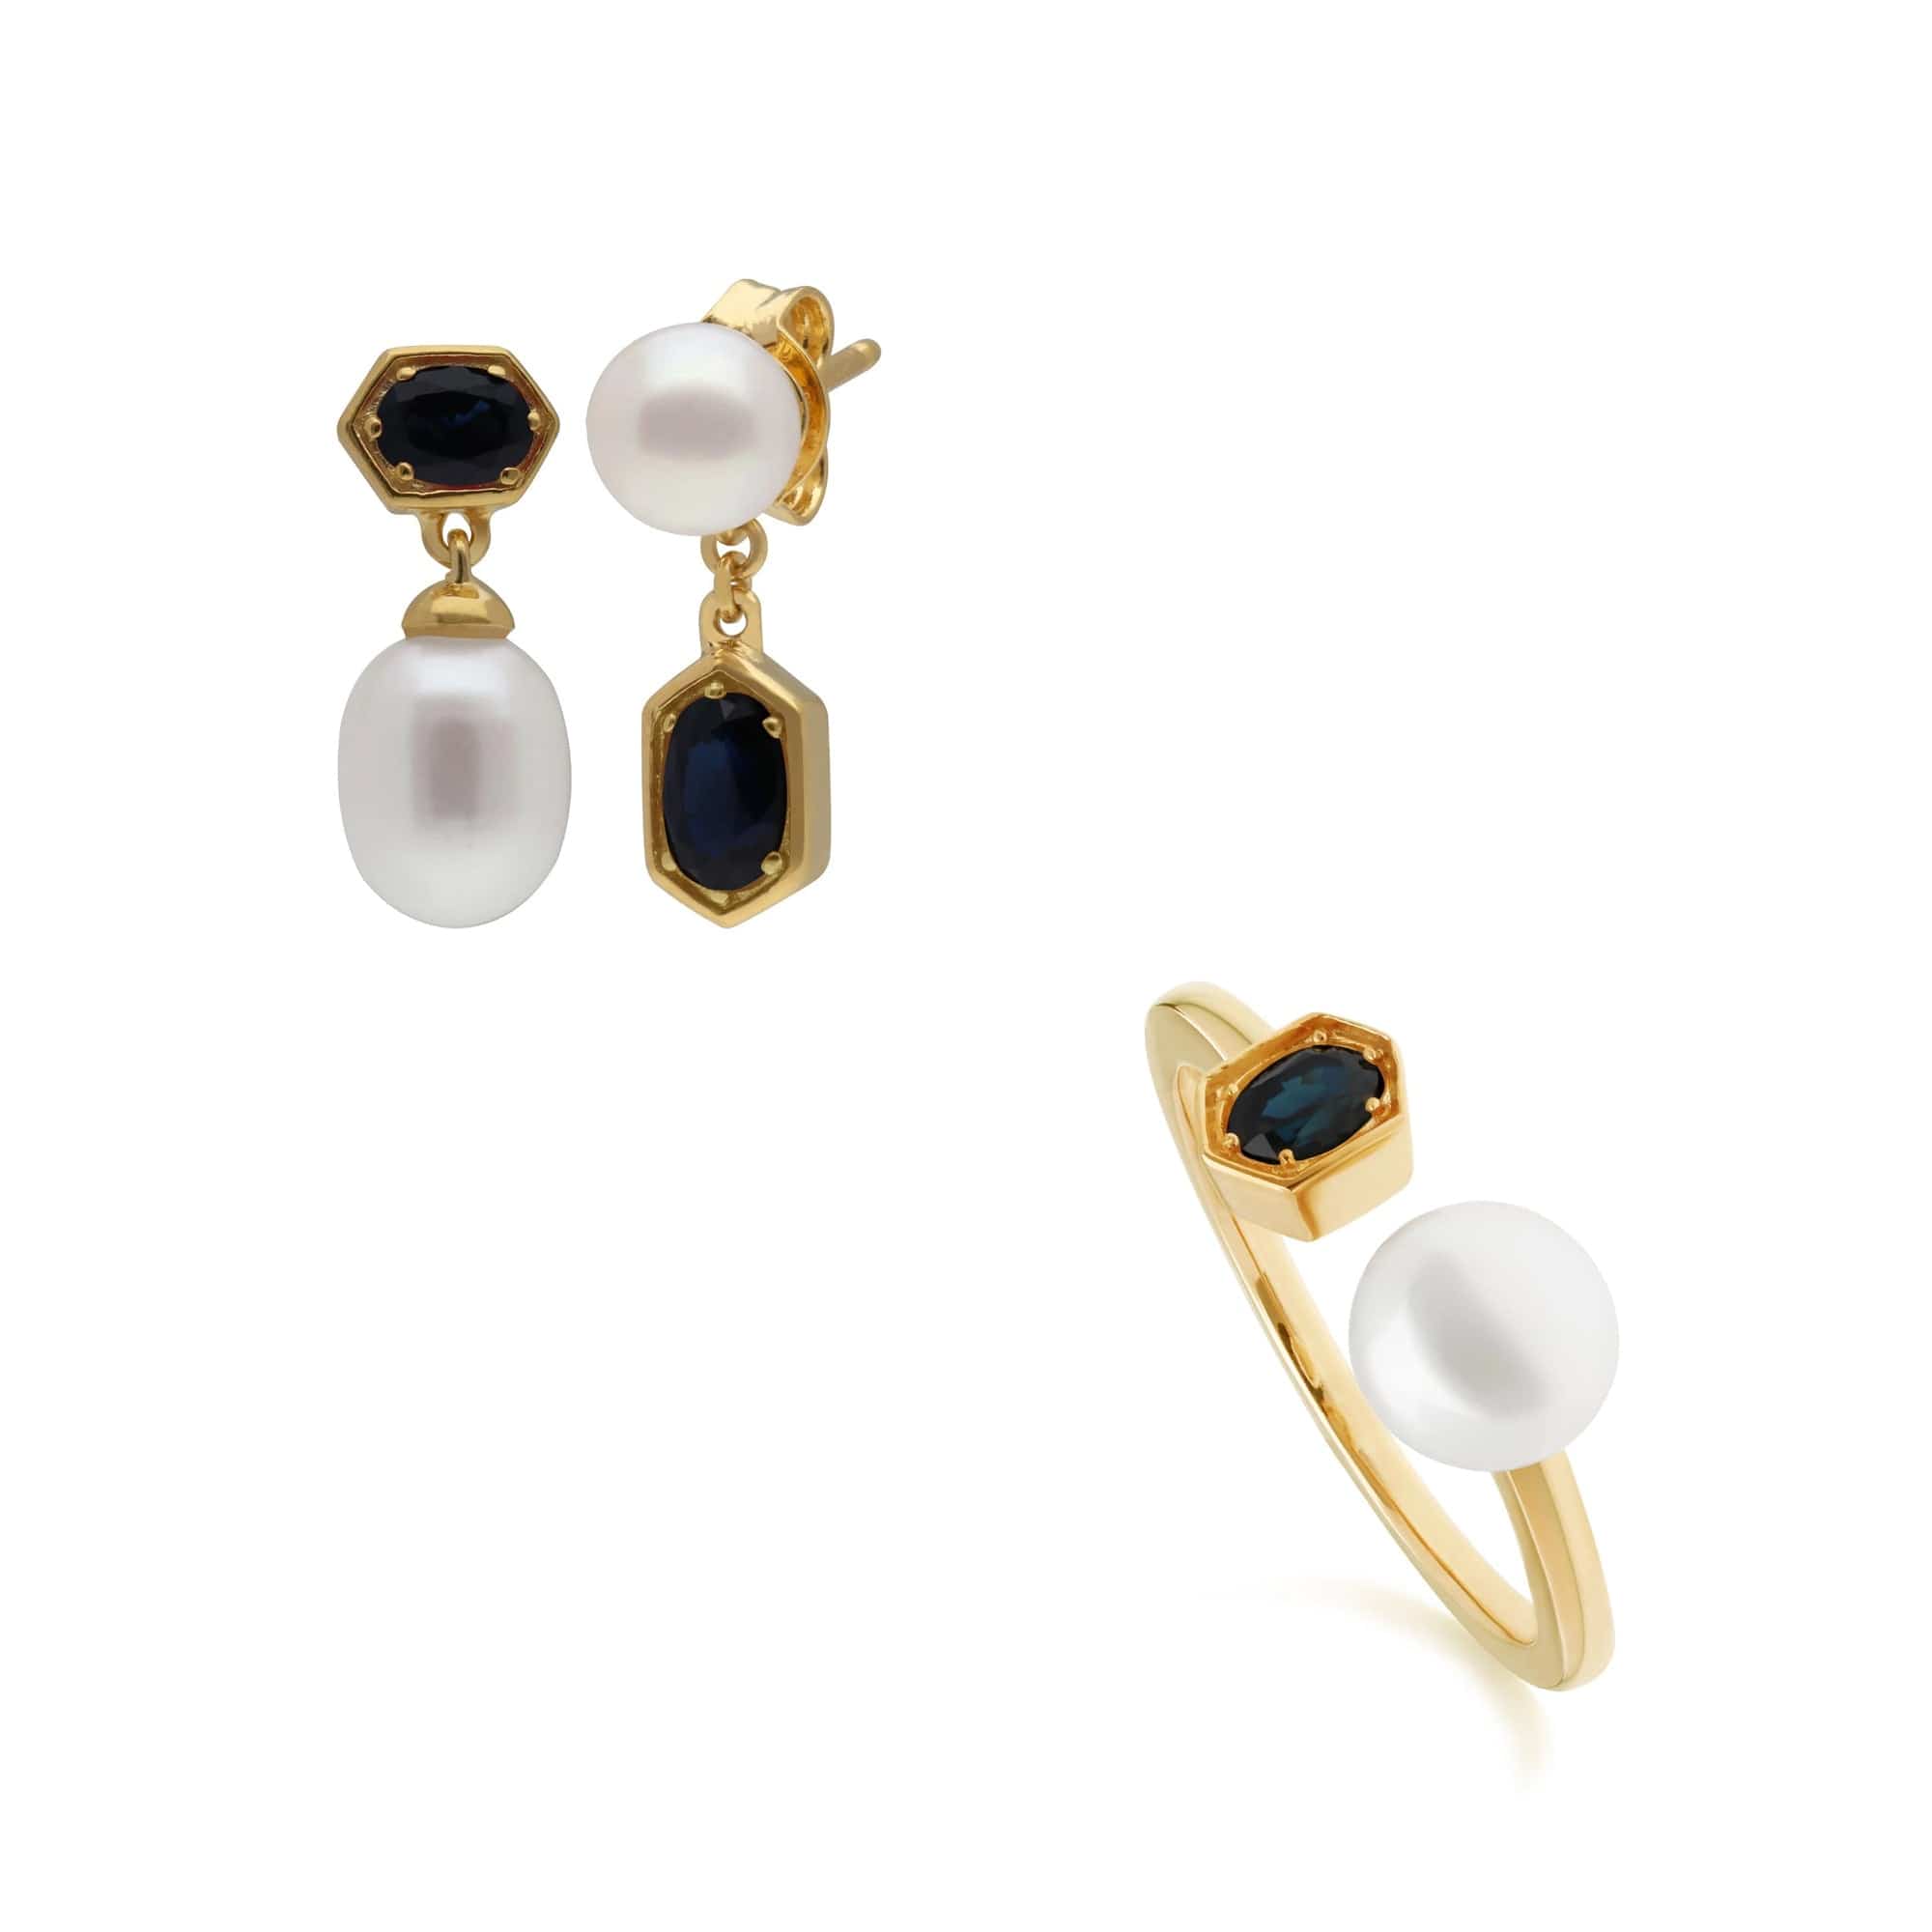 Modern Pearl & Sapphire Earring & Ring Set in Gold Plated Silver